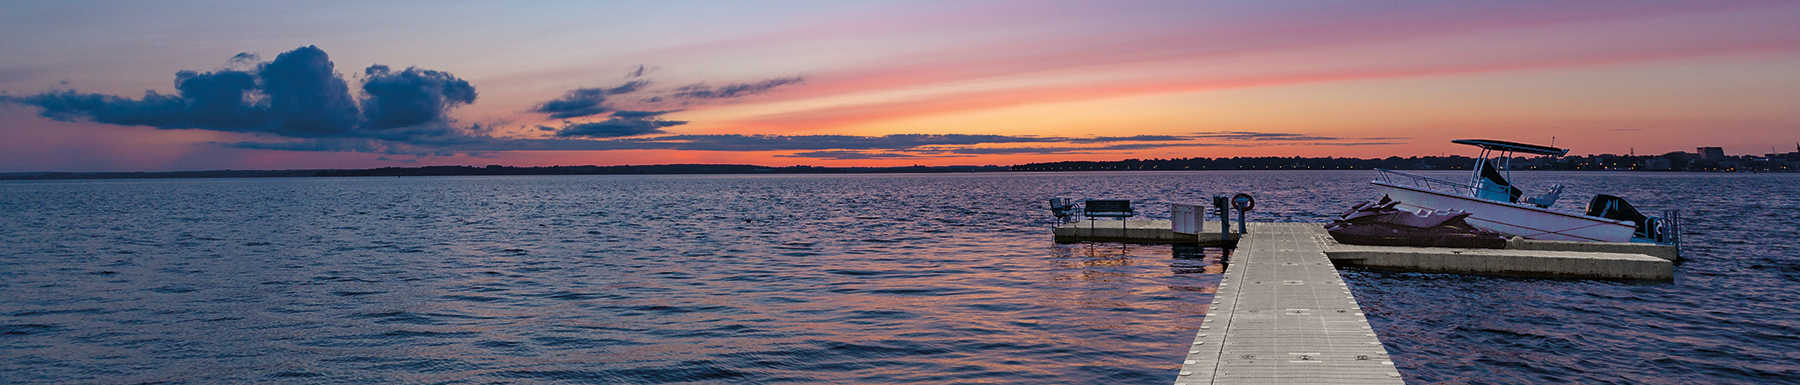 Dock view of sunset with parked motor boat